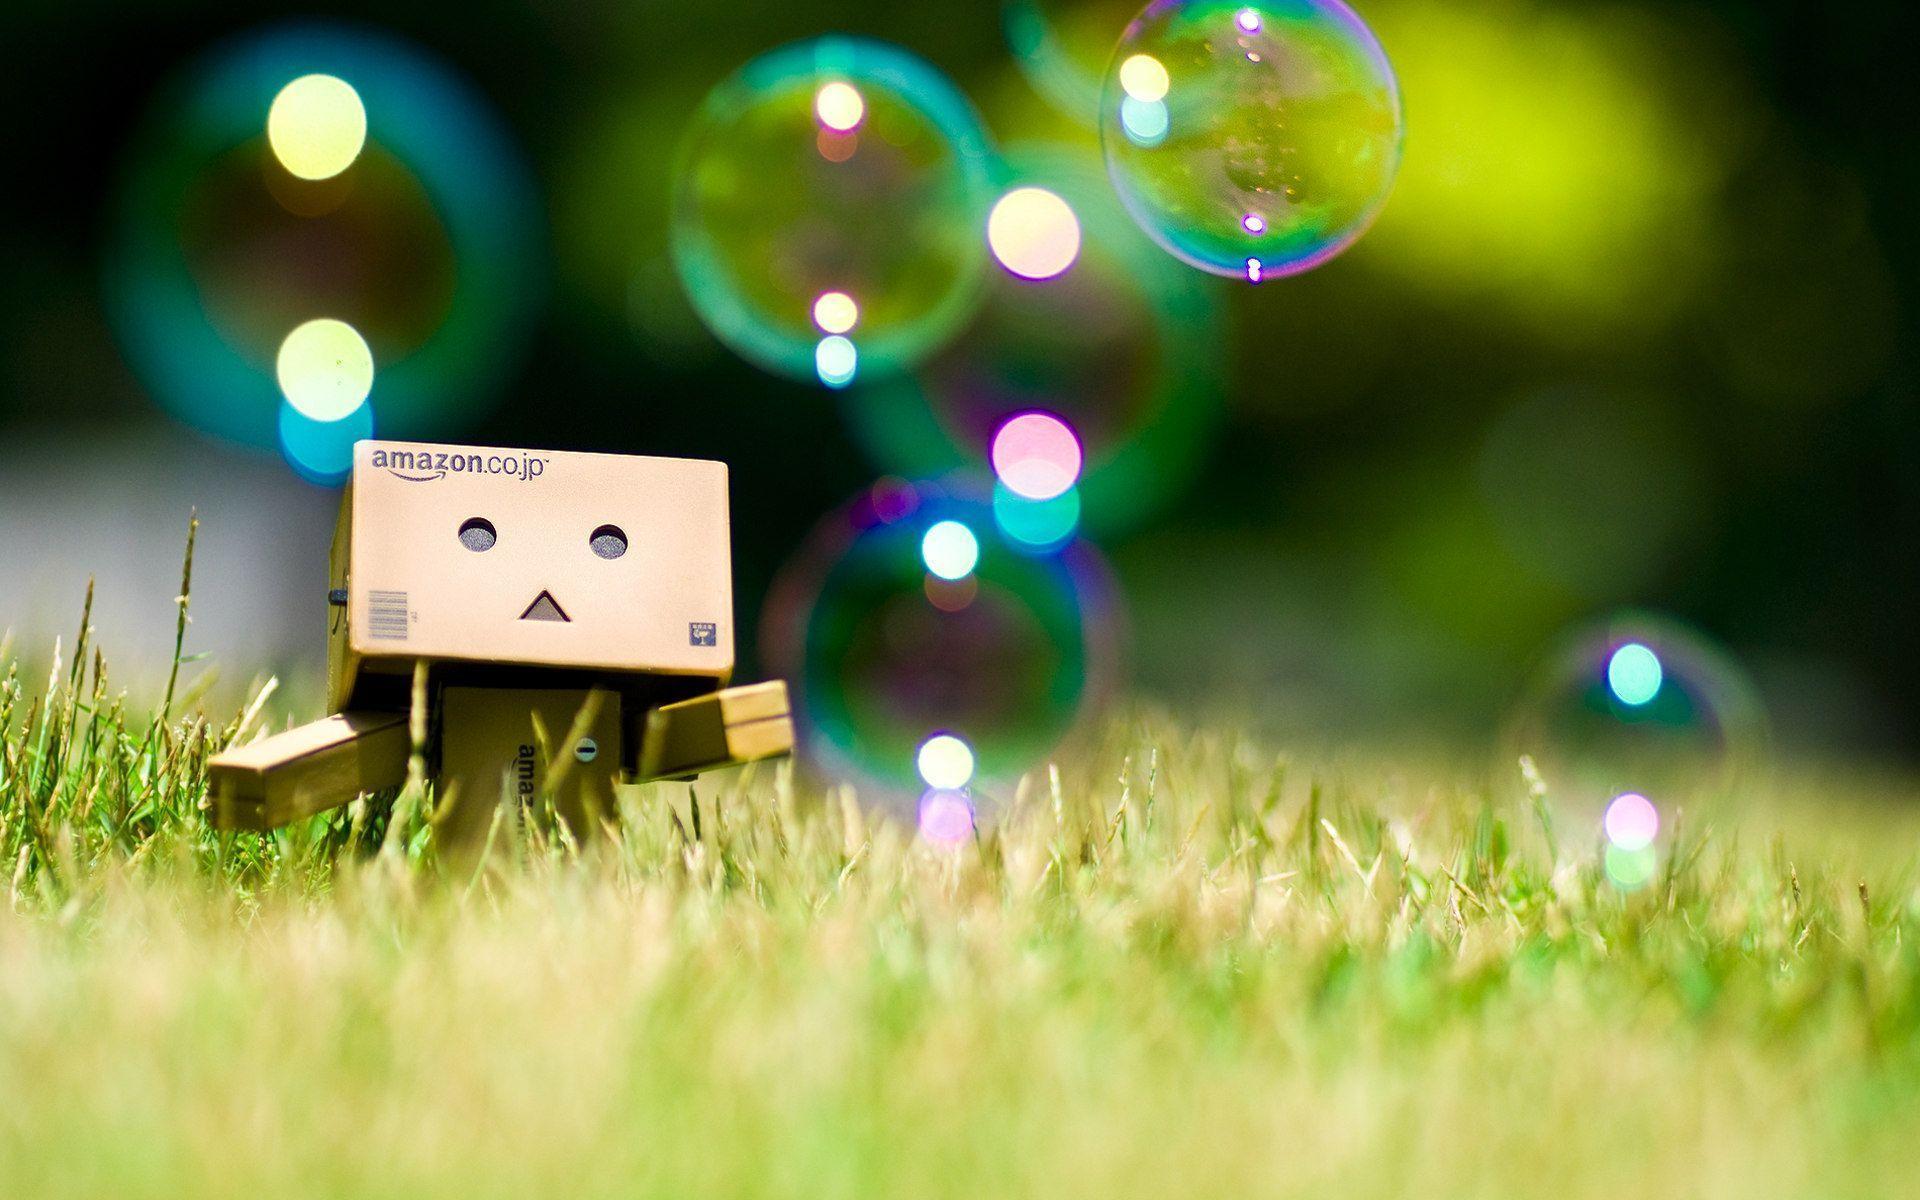 Danbo cute 3D Wallpaper for computer background